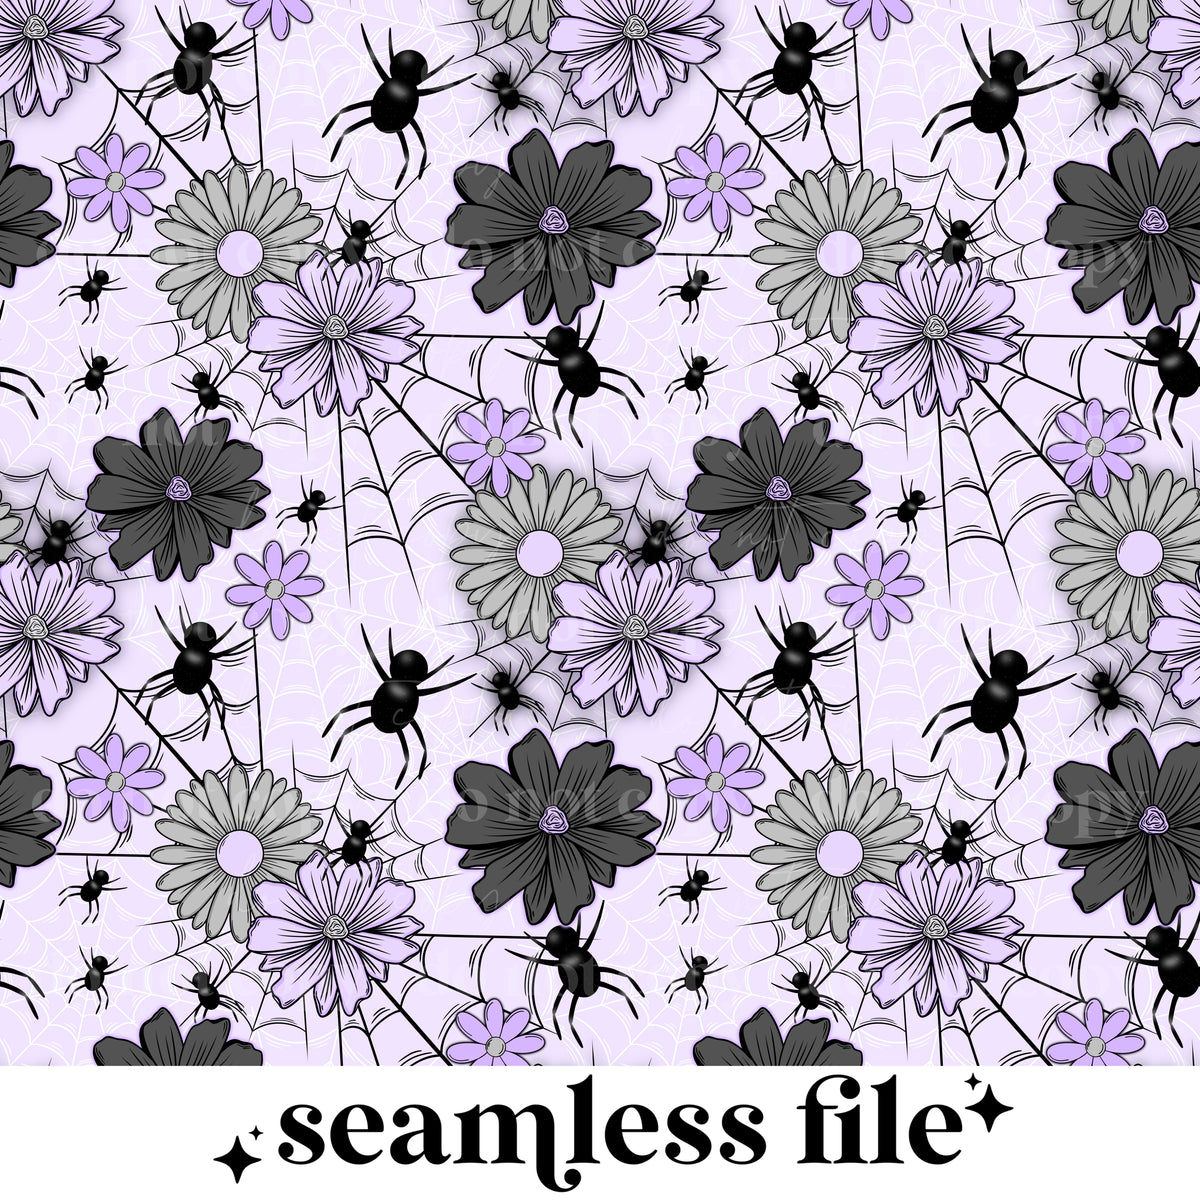 Spider Floral Seamless